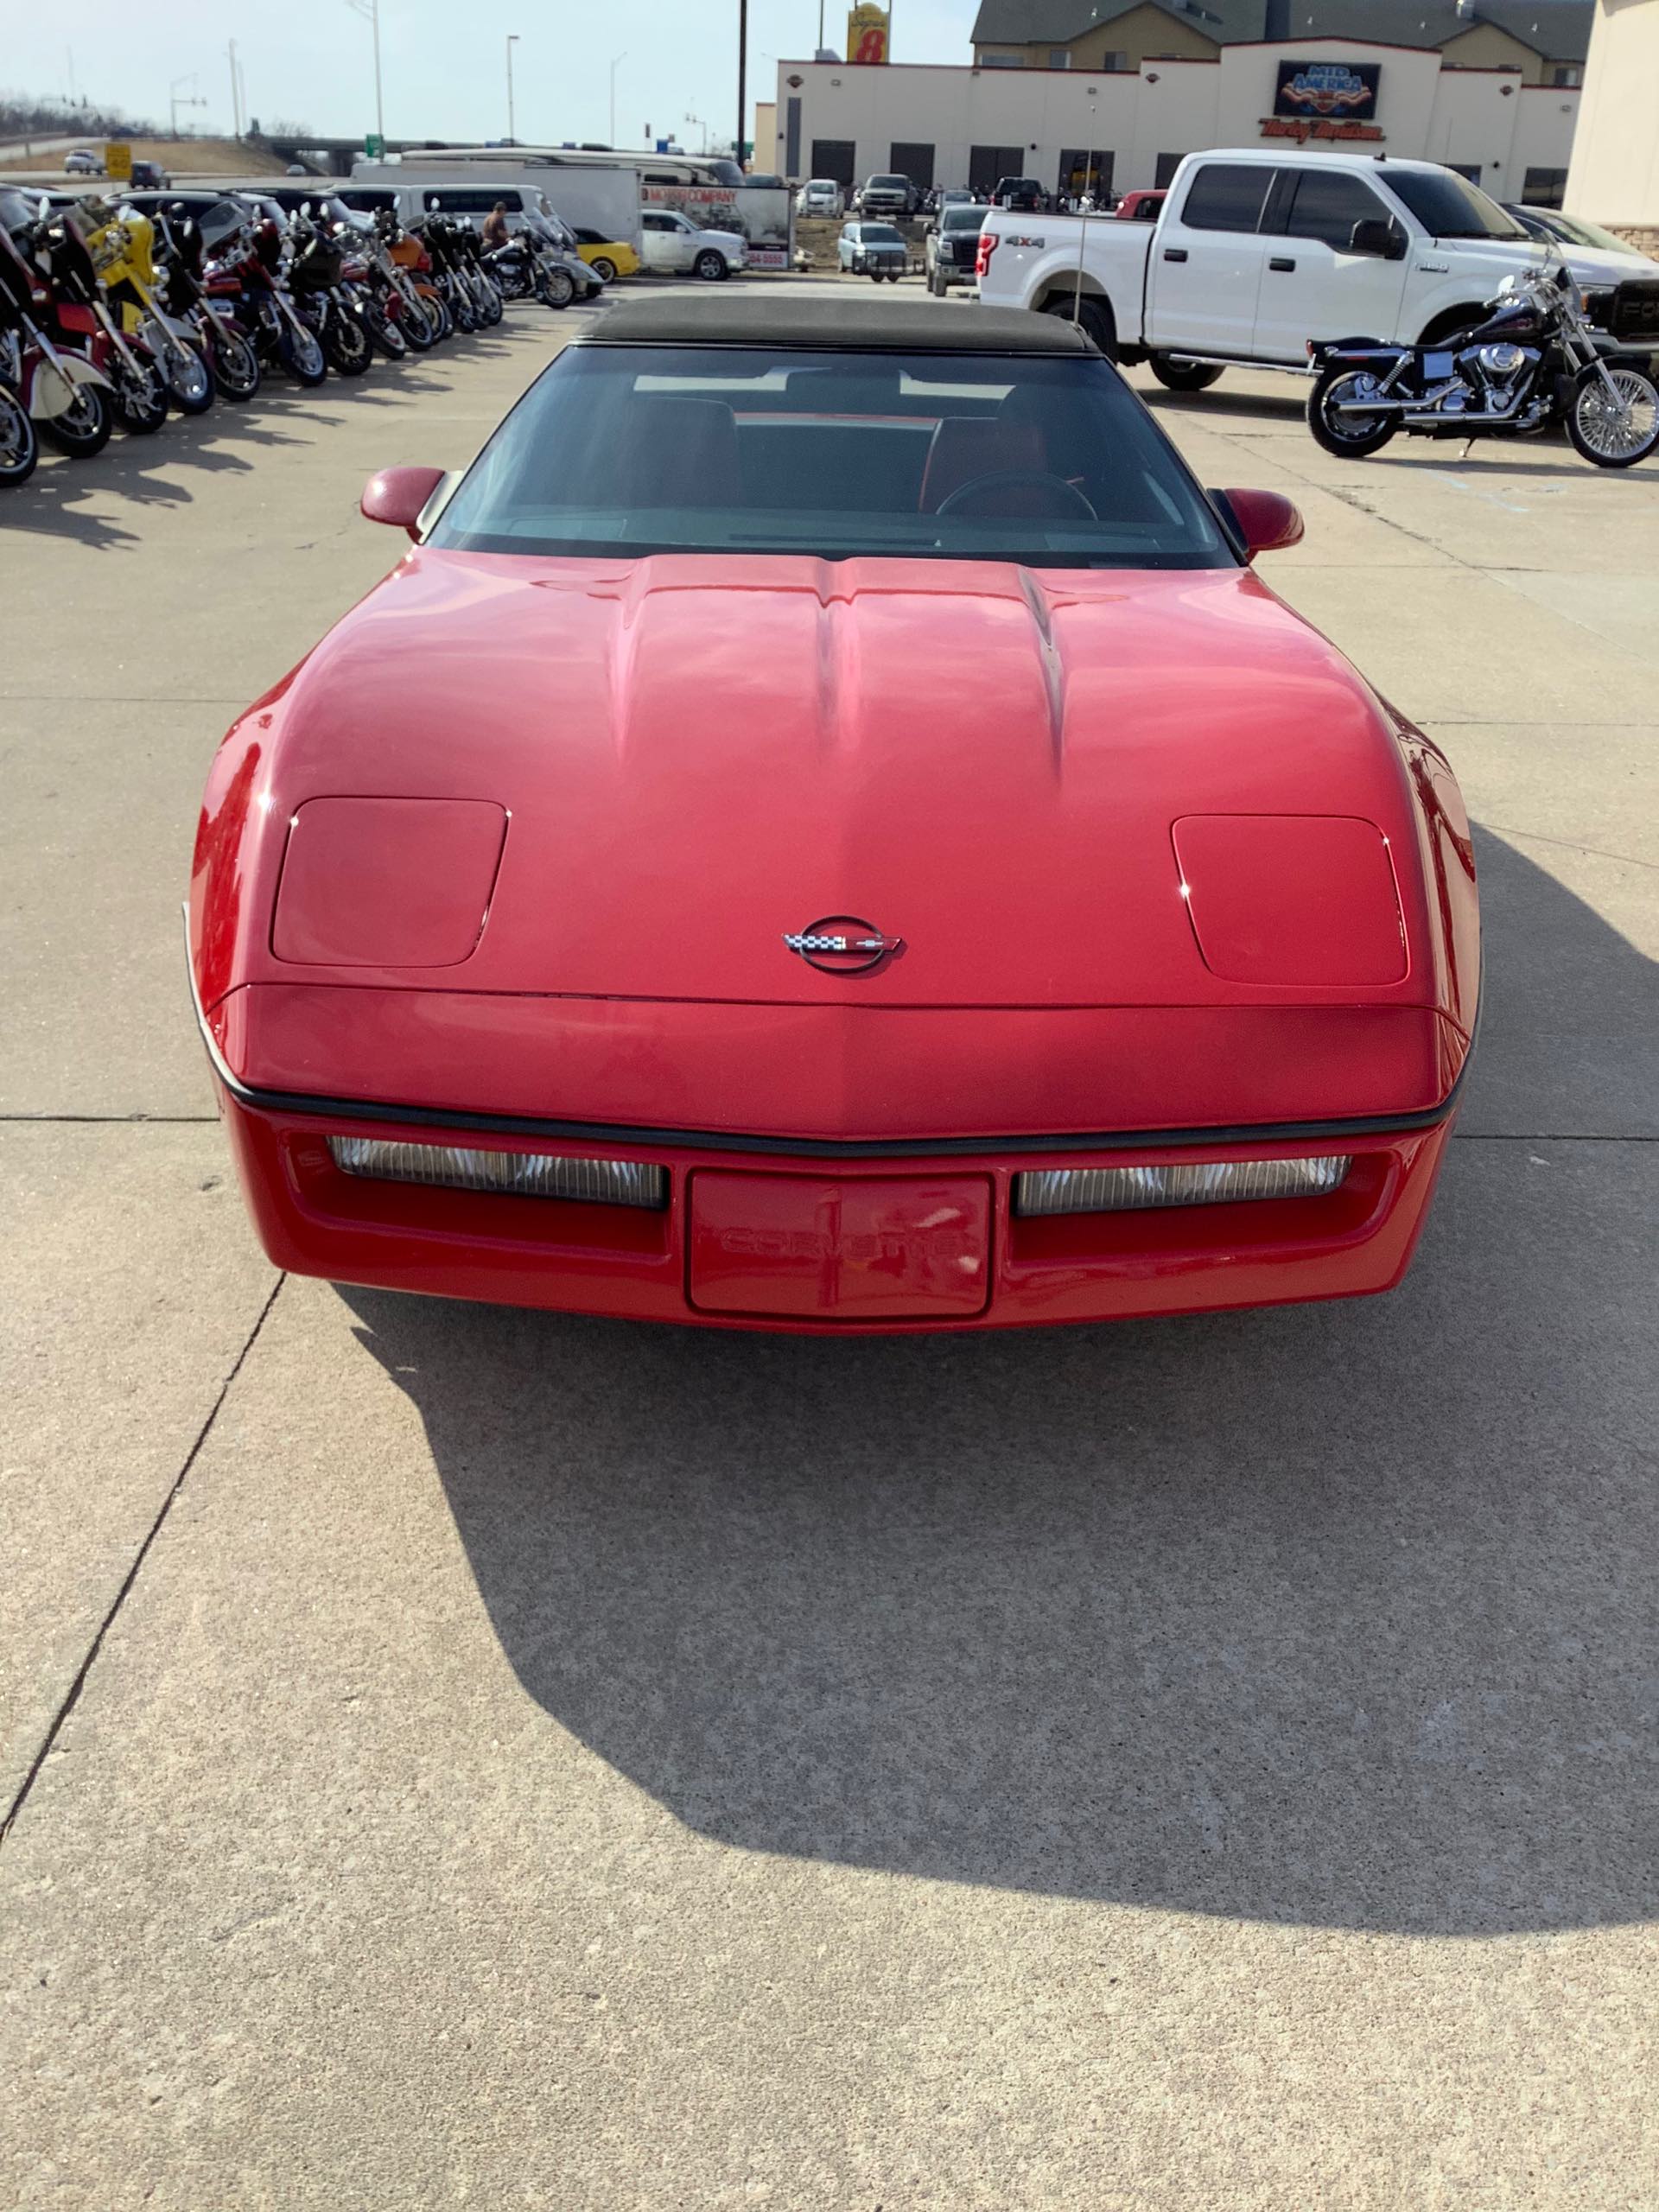 1986 Chevrolet Corvette at Head Indian Motorcycle